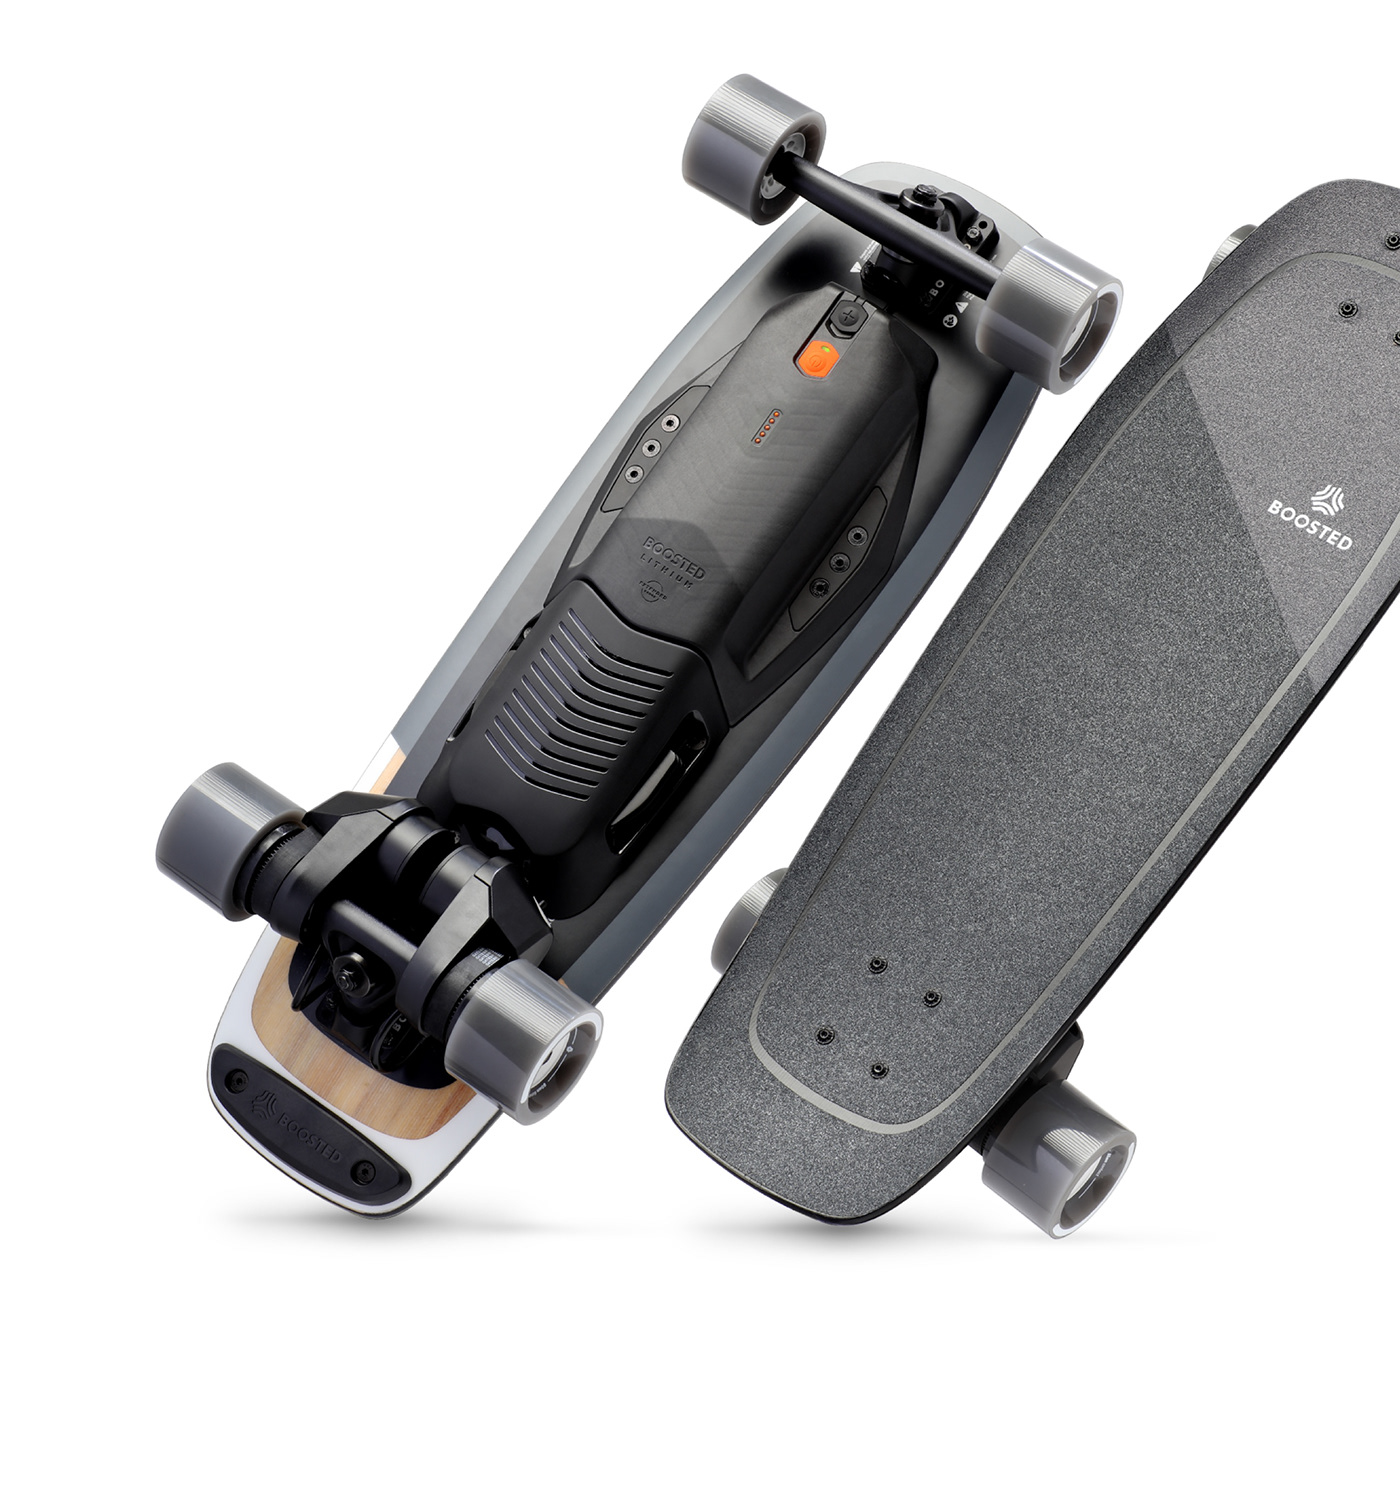 boosted   electric skateboard skate commute Vehicle ride